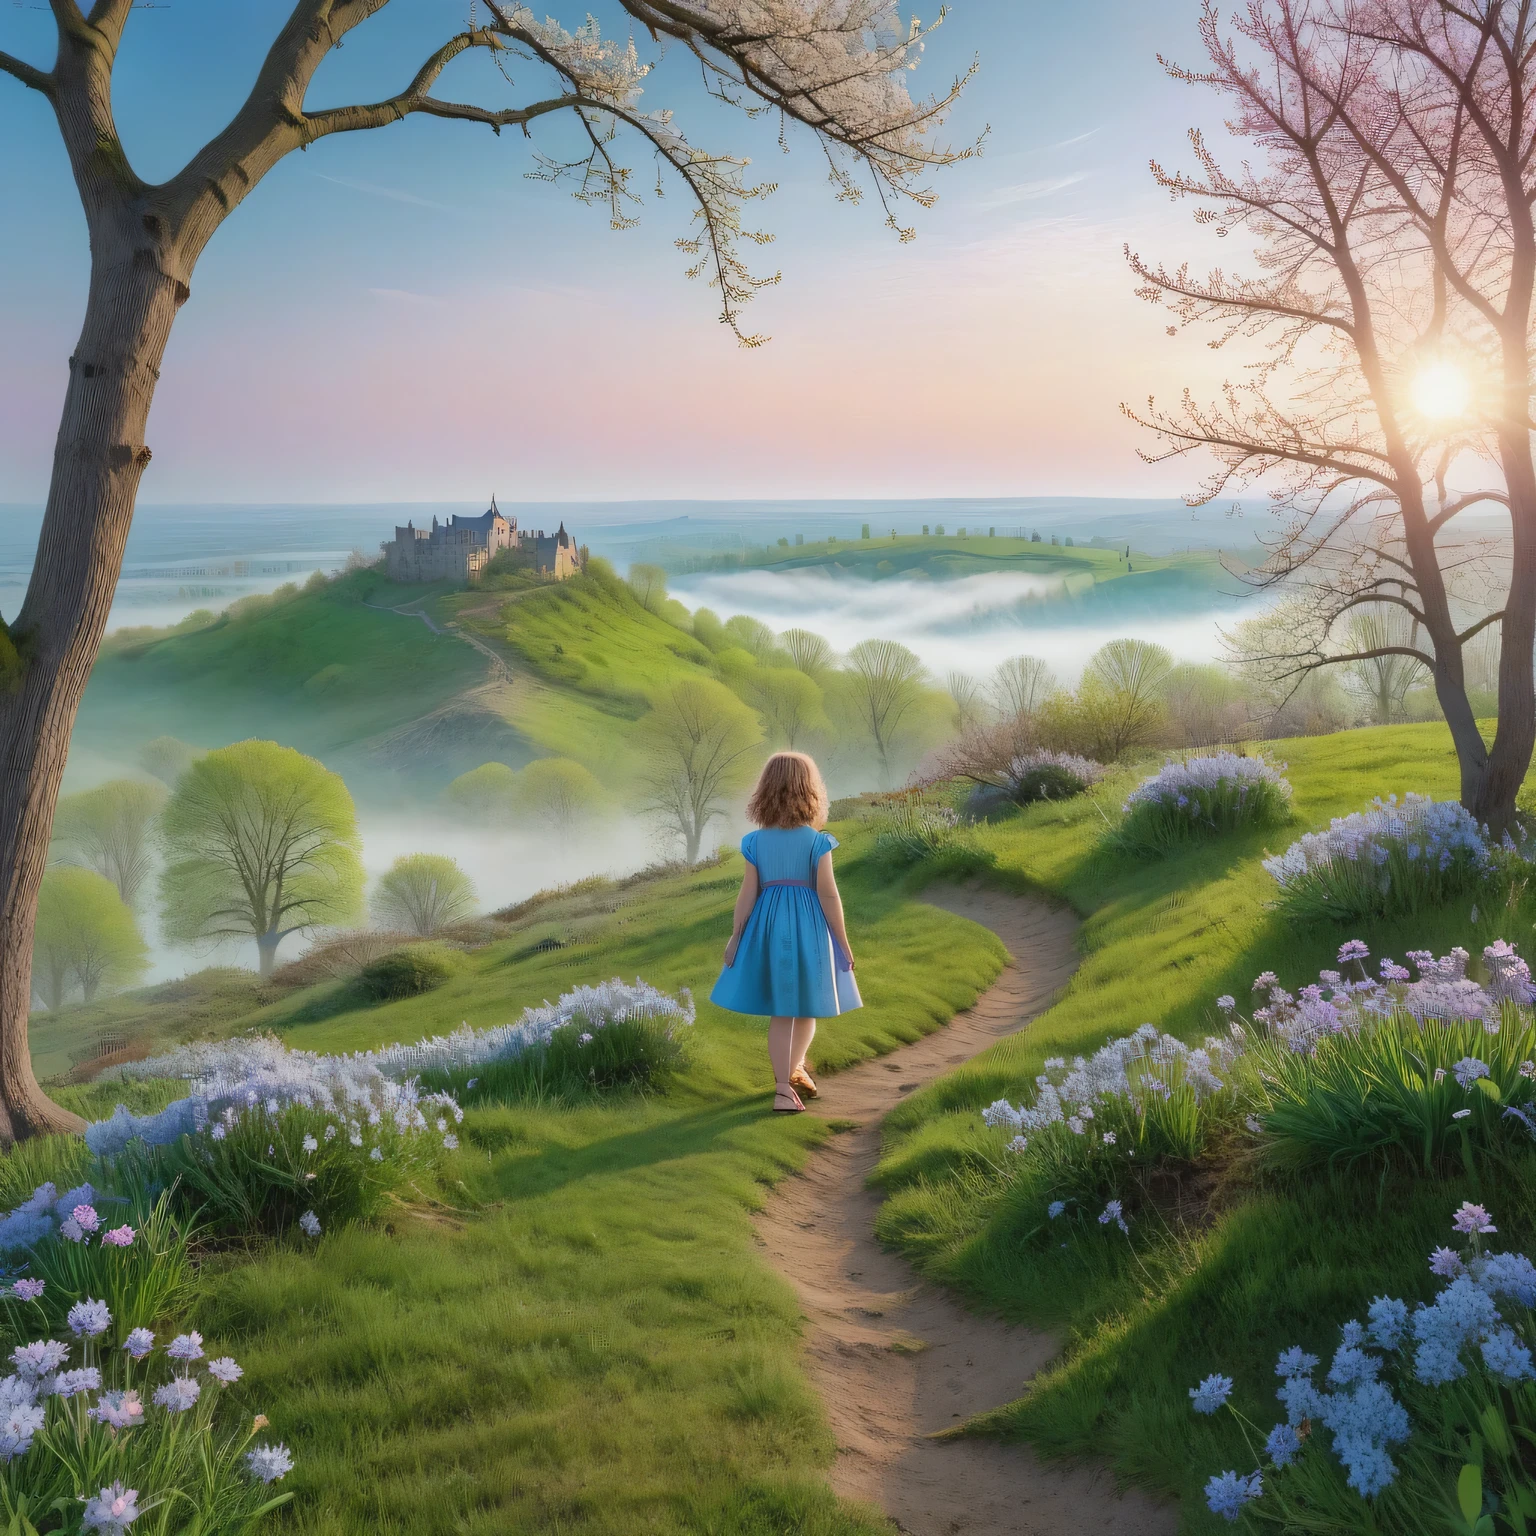 (light morning fog in the distance):1.2335, (POV:1.4), First-person view from a high cliff, an 8-year-old girl with light curly hair in a blue dress and blue sandals looks down, a spring meadow stretches in front of him with the first spring flowers and young green grass, the first spring insects circle over the flowers, trees and shrubs grow on the edge of the clearing, spring flowers on the trees, green buds swell on the shrubs, early vesta, morning, the sun is just beginning to rise on the distant horizon, coloring the sky pinkish, Spring Morning, Beautiful Spring Morning, palette of early spring morning, (masterpiece:1.305), (high resolution:1.305), 32k, (digital art:1.1), texture smoothing